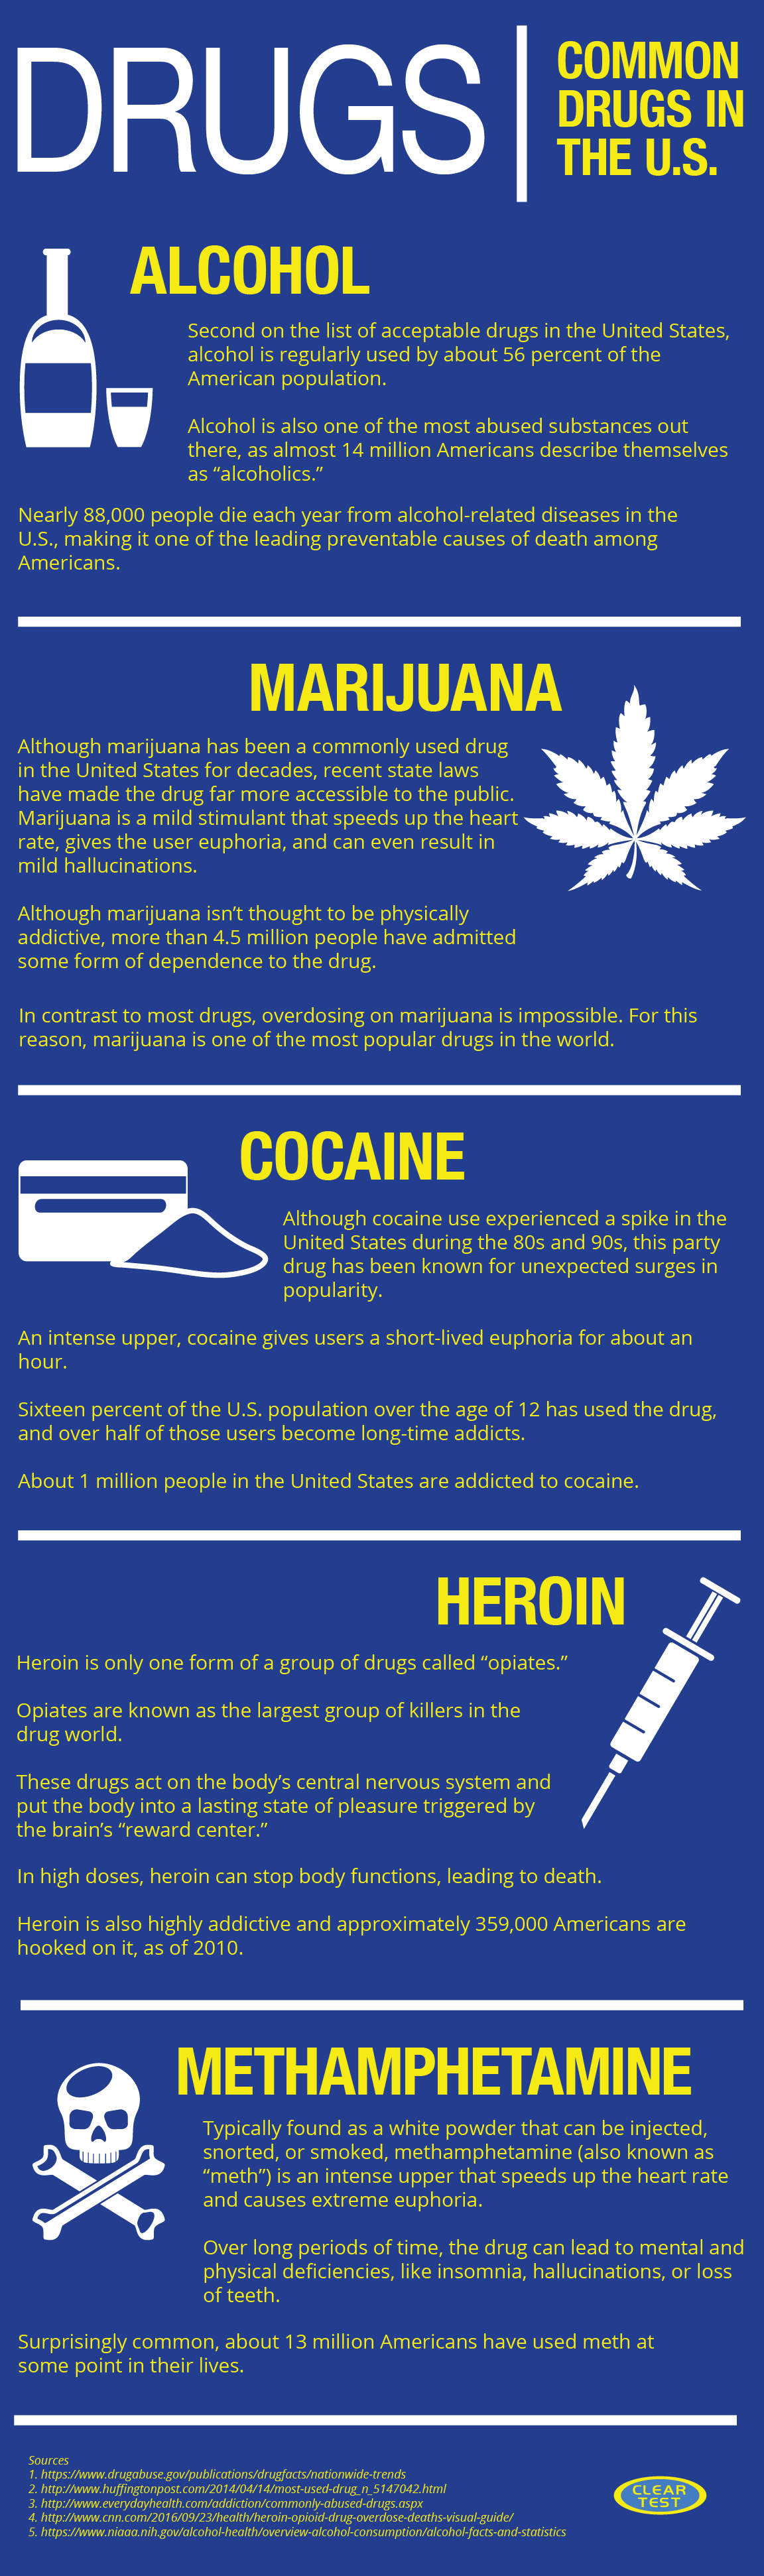 common-drugs-in-the-us-infographic 